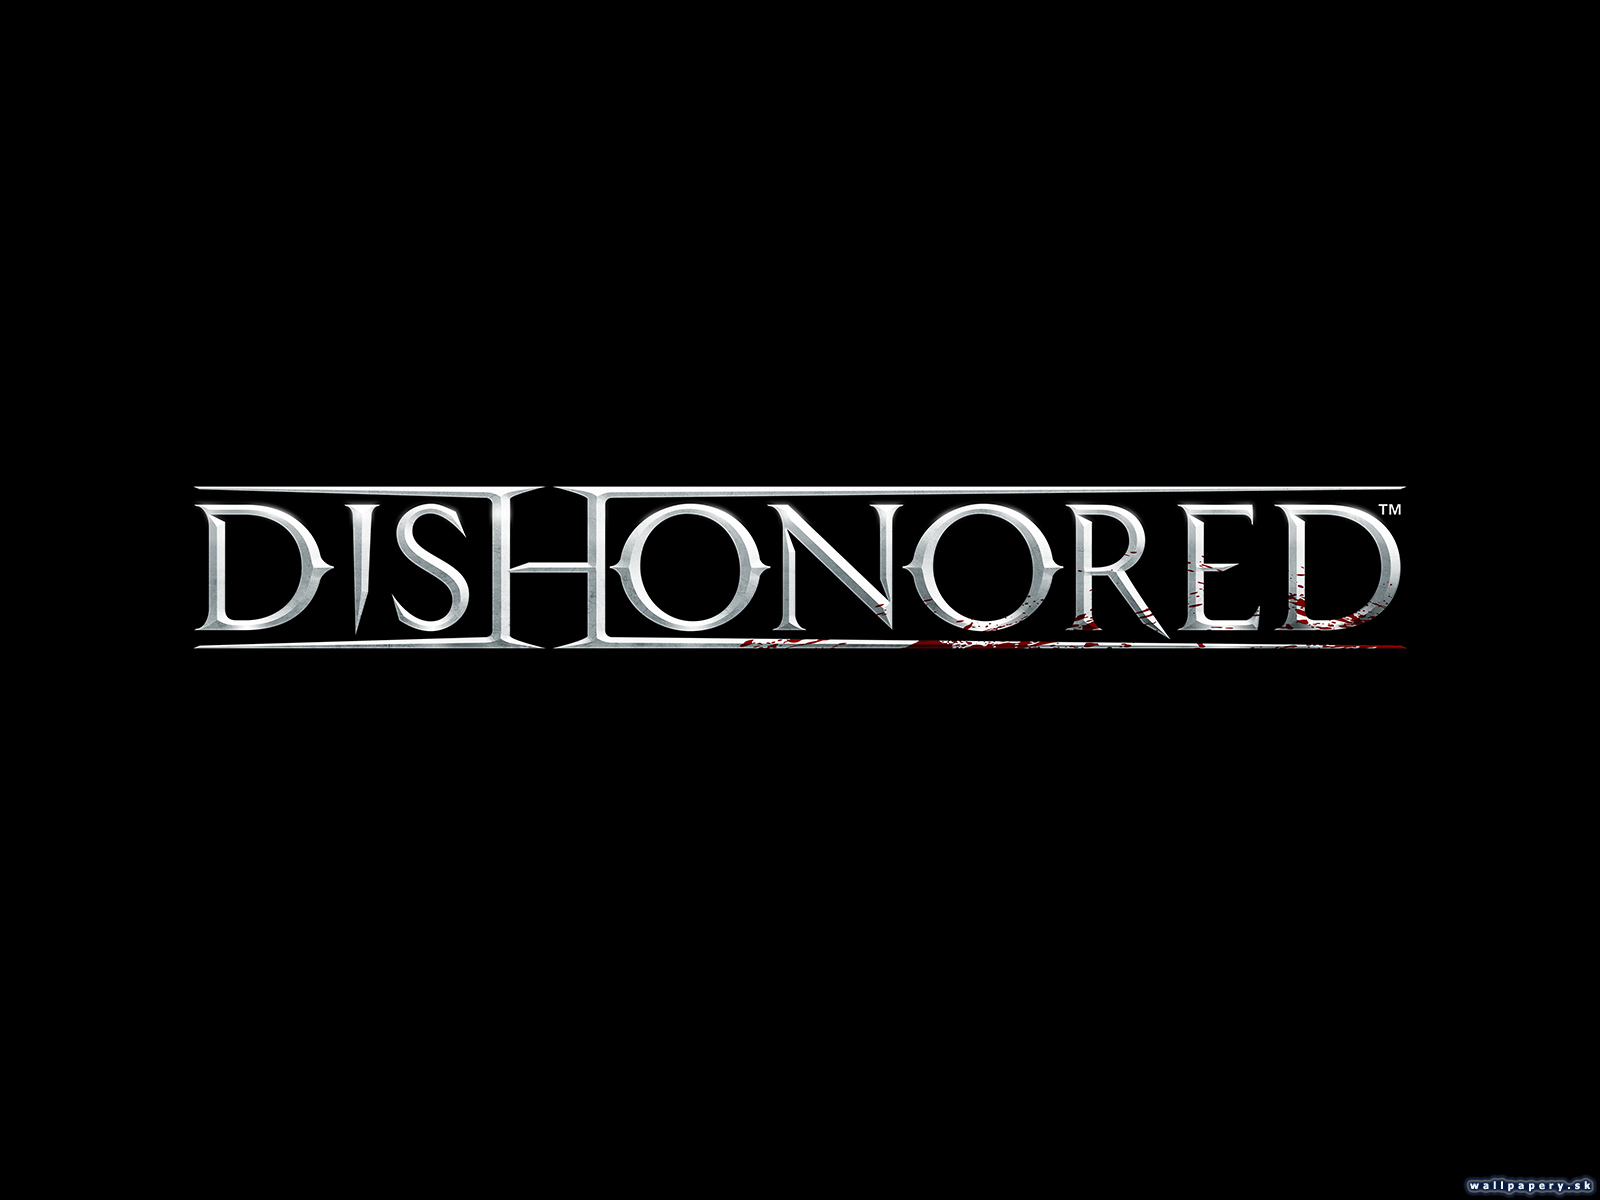 Dishonored - wallpaper 6